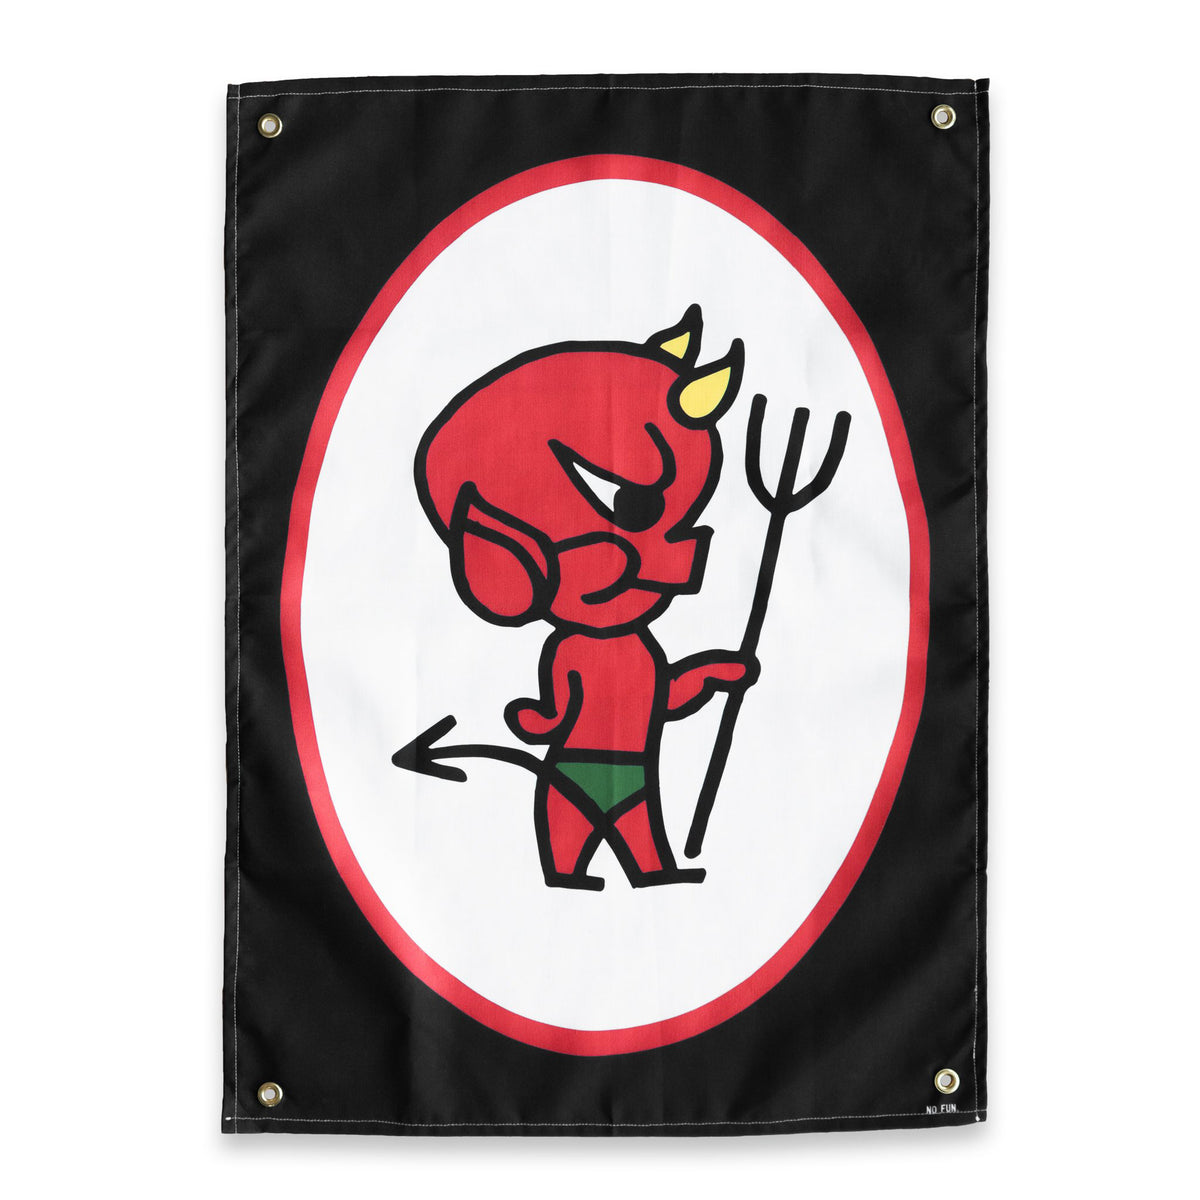 The "Devil" Wall Tapestry by No Fun®.  Tapestry is black, with a large red and white oval in the center.  There is a cartoon devil in the oval that is red, has yellow horns, and green shorts.  He is also holding a pitchfork.  There is a small "No Fun" logo in the bottom right hand corner.  There is one brass grommet in each corner of the tapestry.